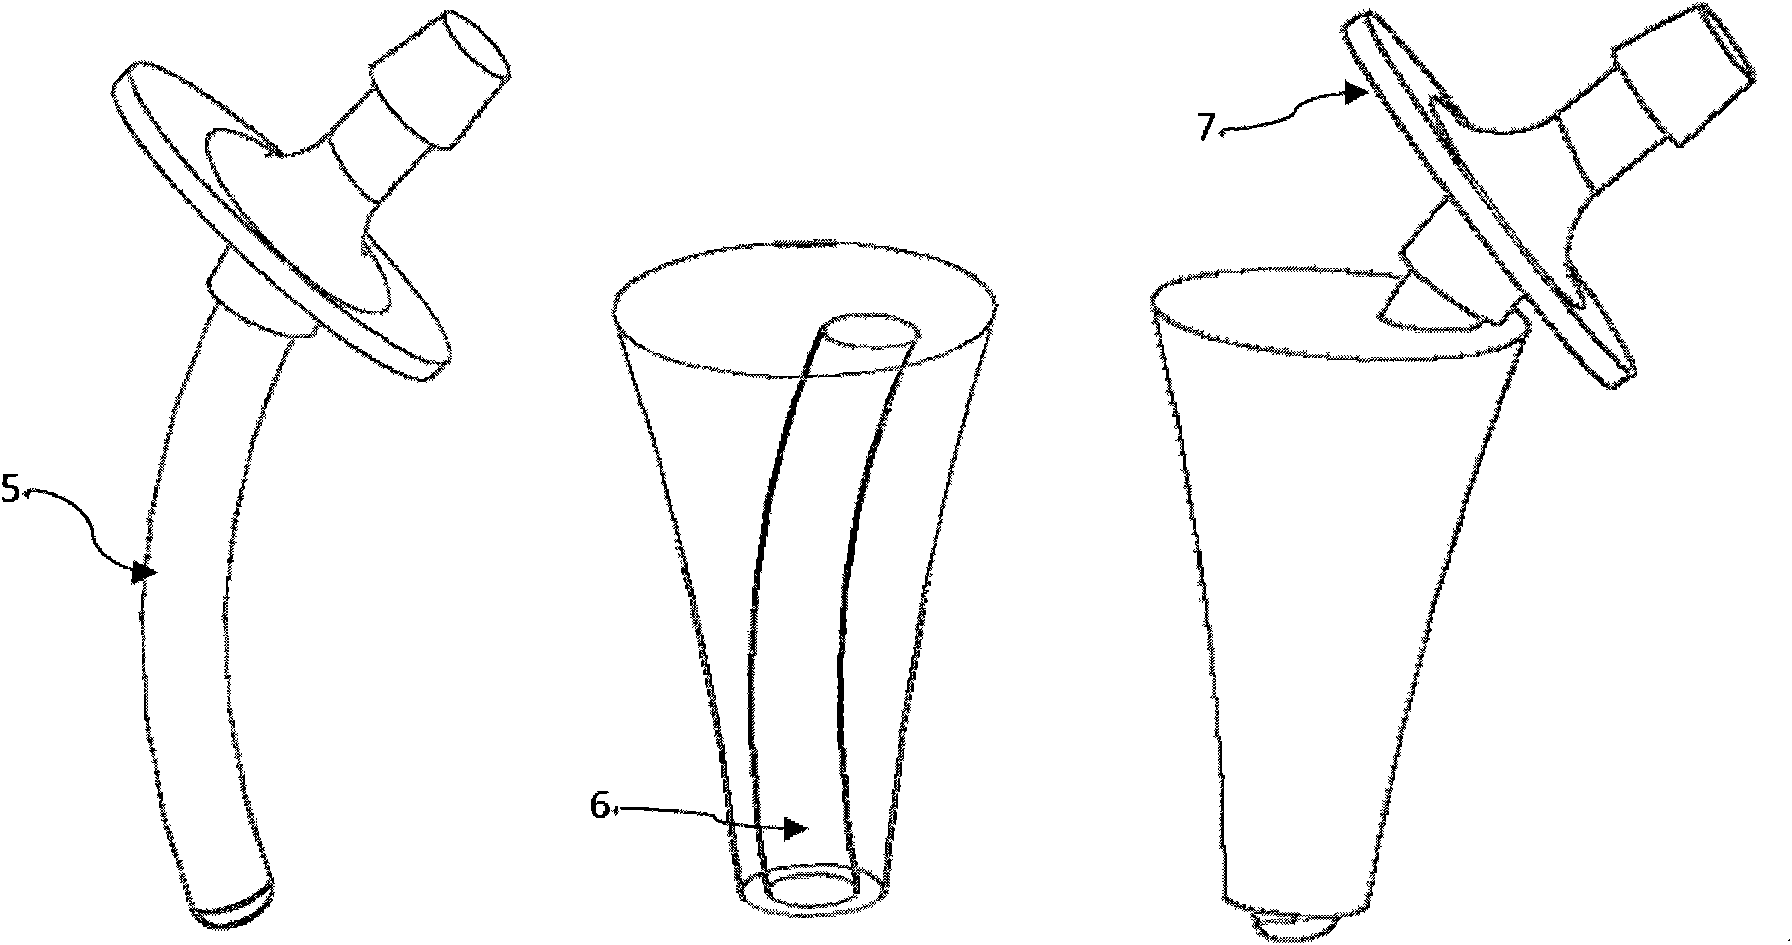 Artificial femoral prosthesis